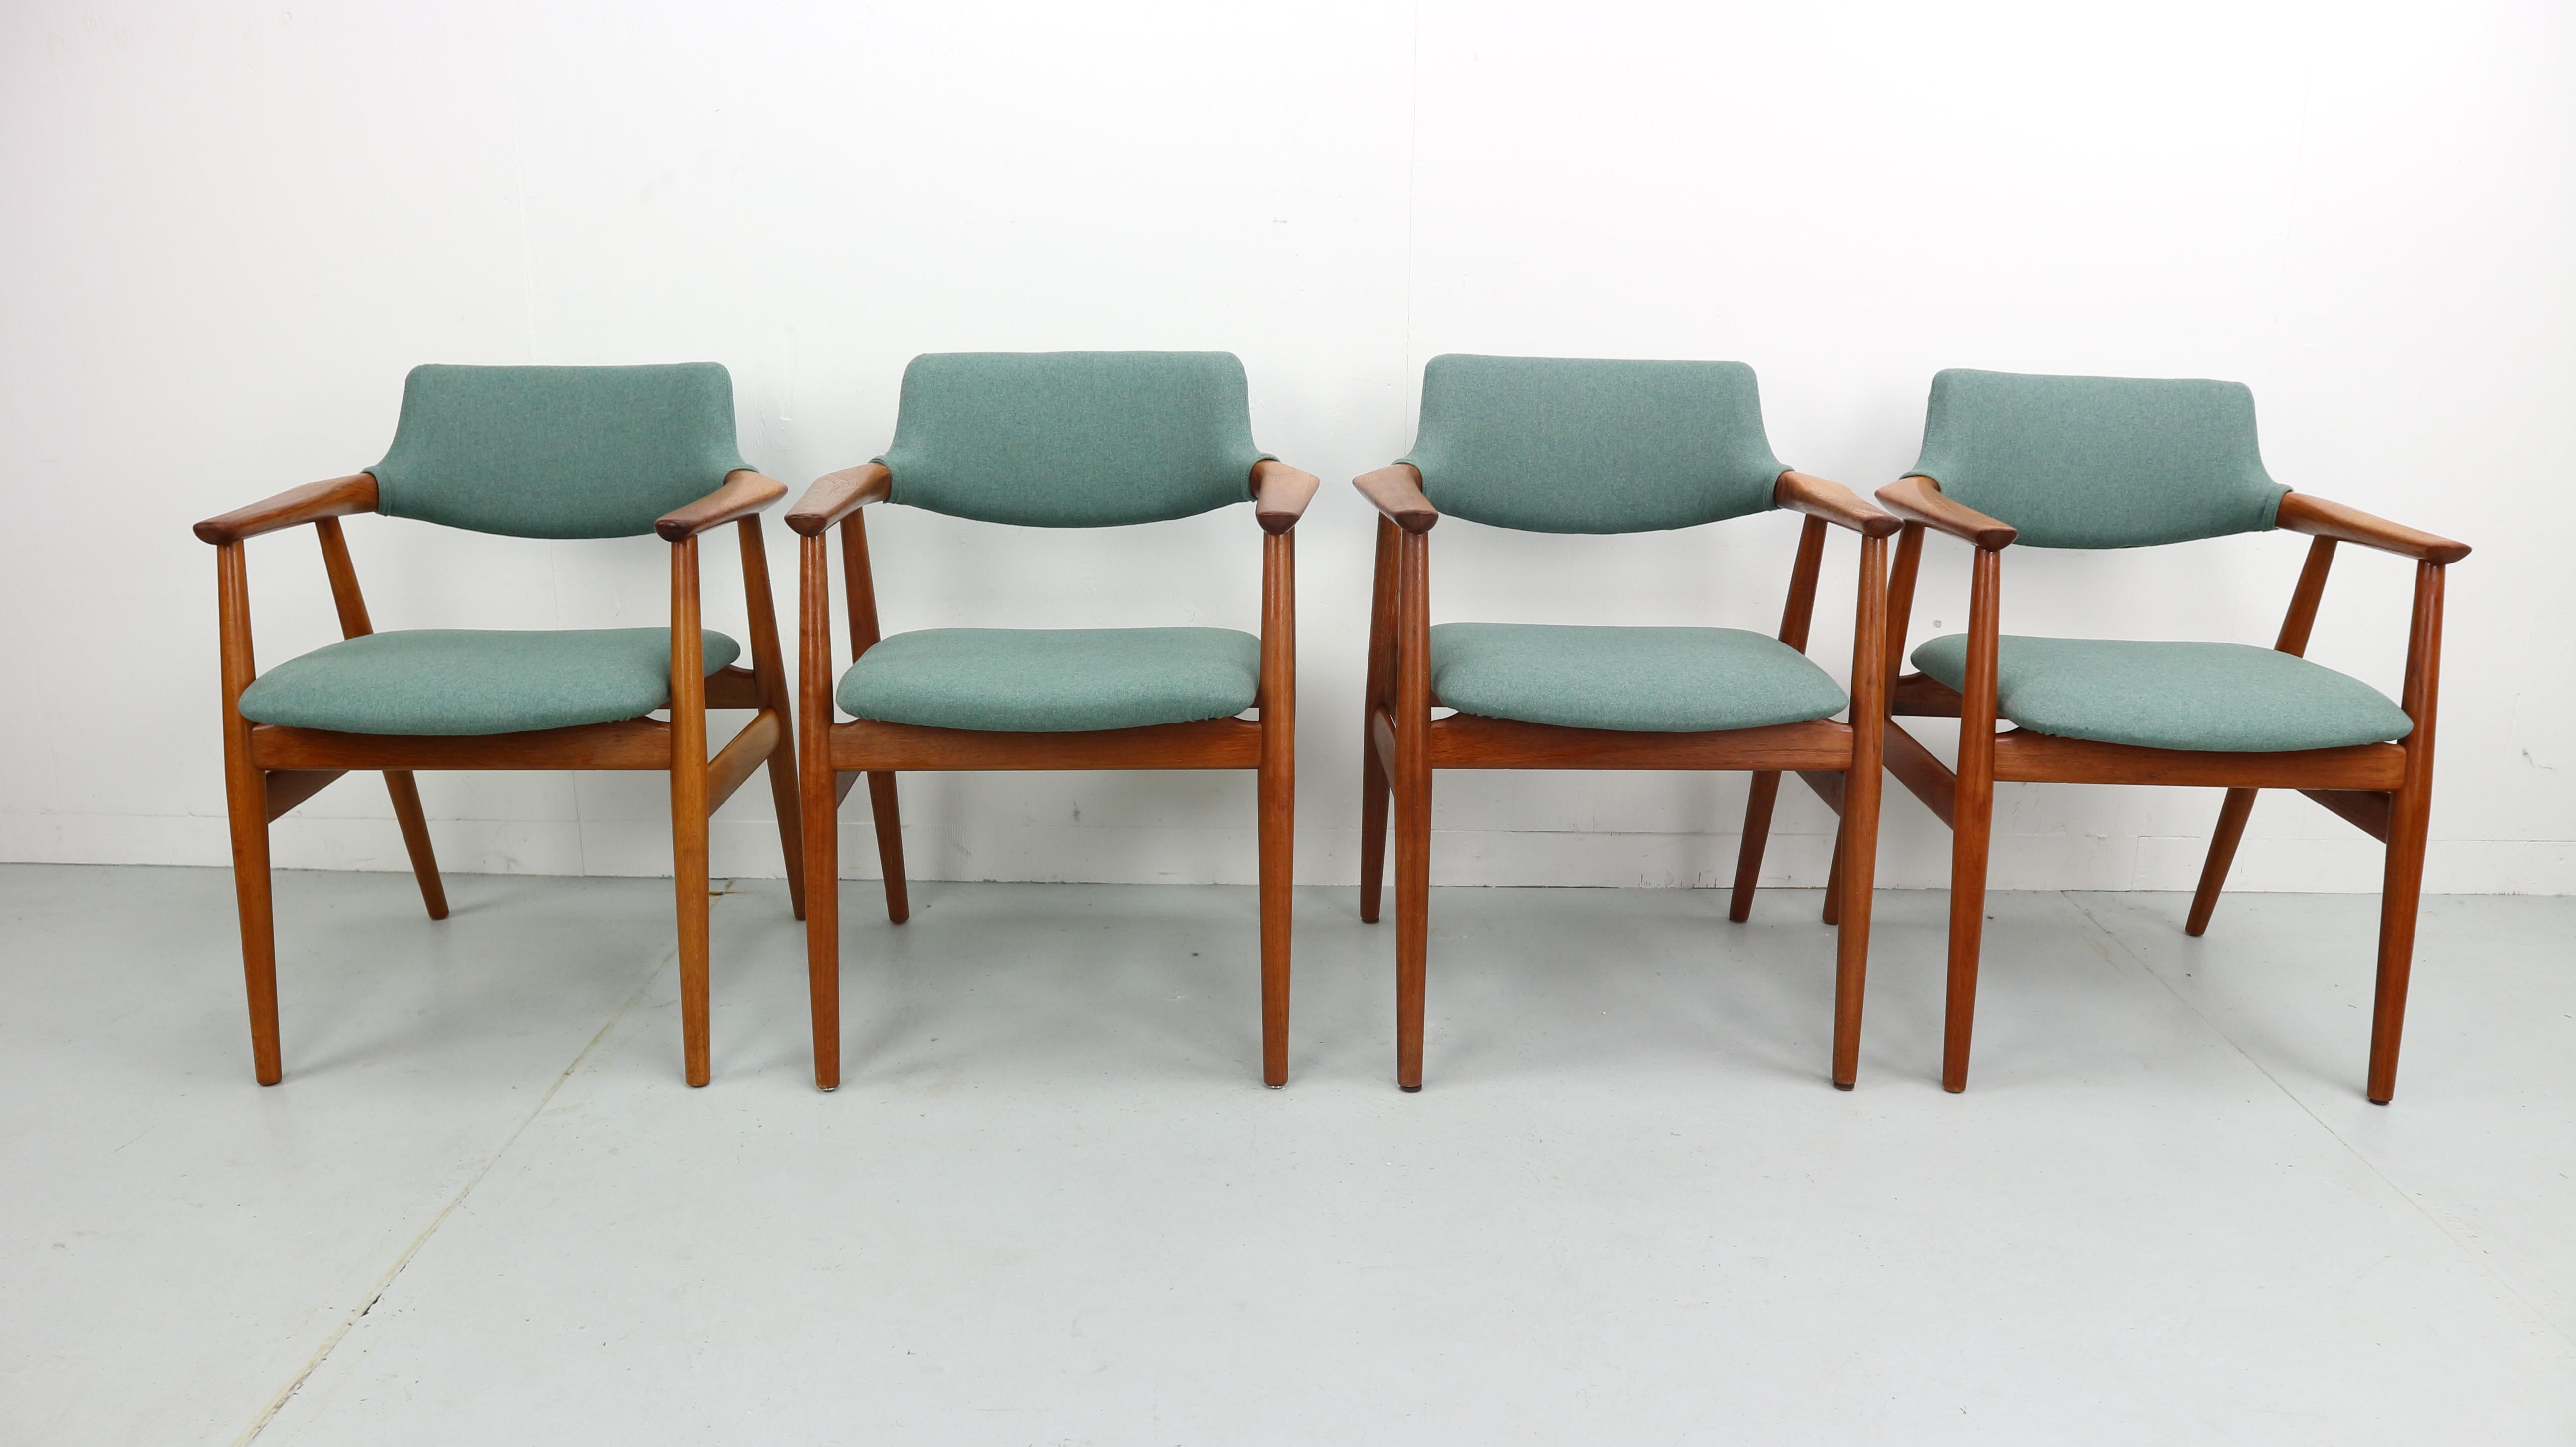 Beautiful set of four 1960s armchairs, in a fantastic condition. Made in Denmark, designed by Svend Aage Eriksen. Model- GM11.
Danish modern design, manufactured by Glostrup Denmark. Newly upholstered in a soft woven wool fabric.